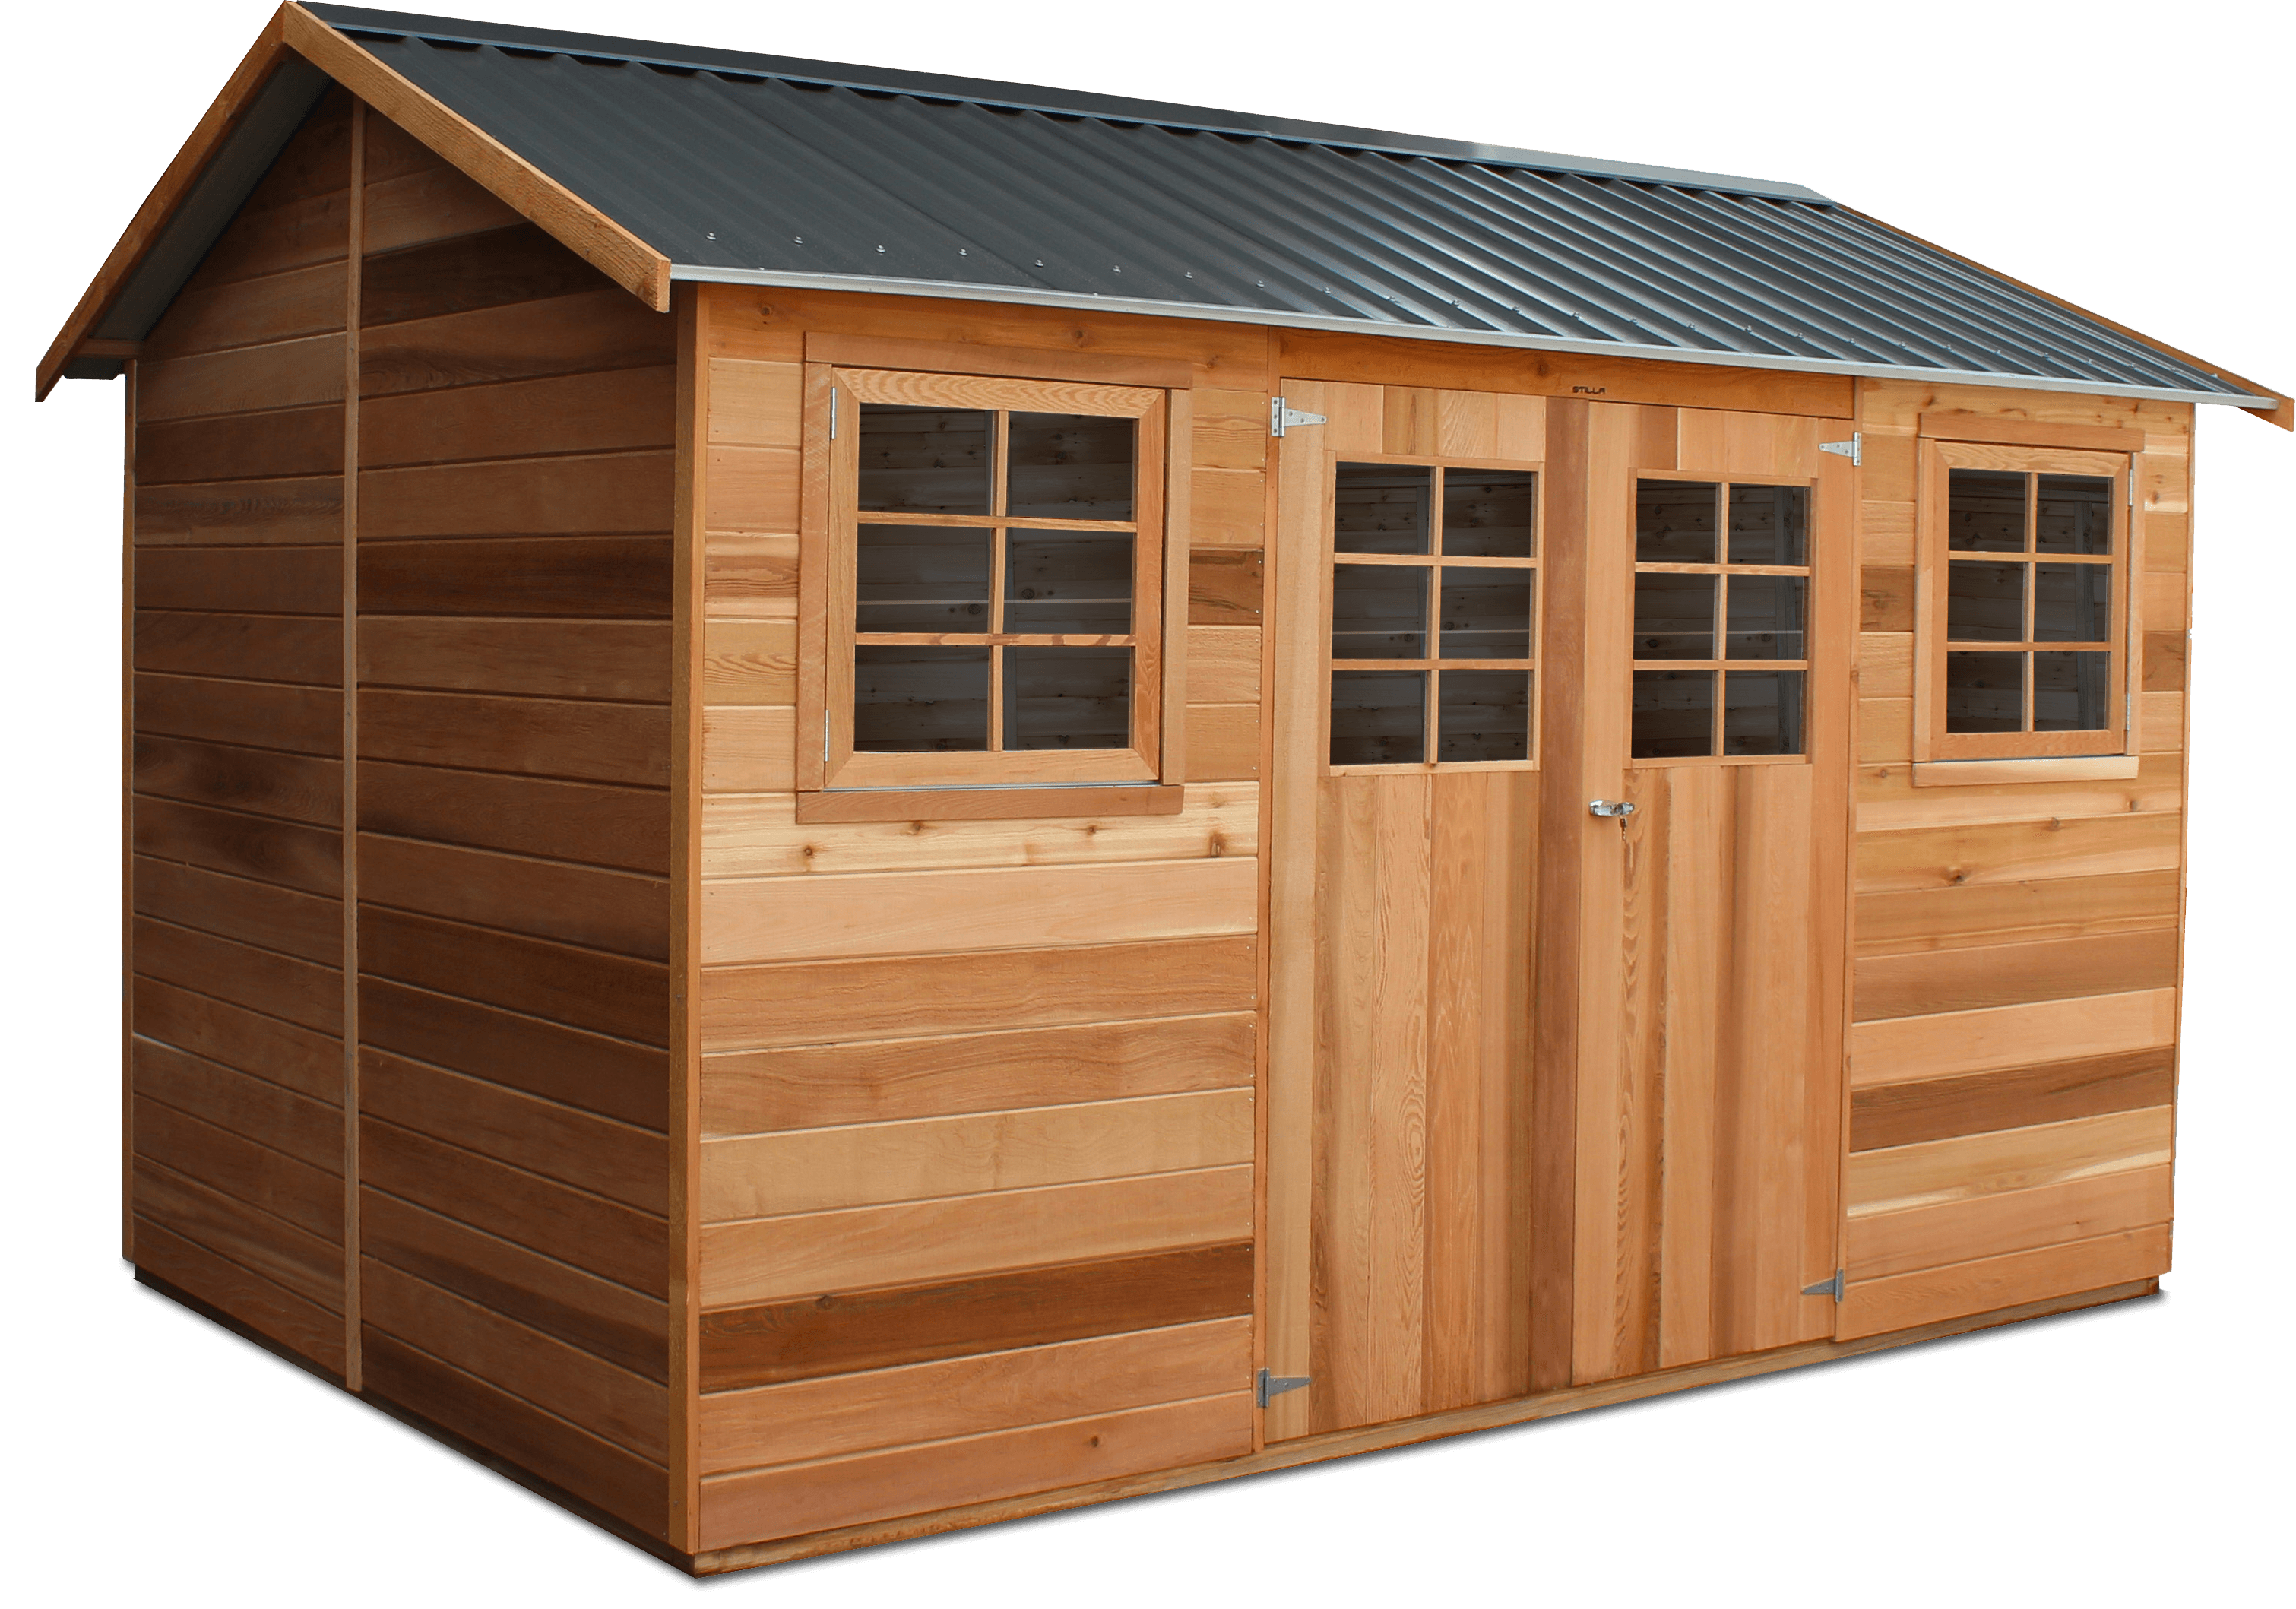 Willow 12x8 Timber Garden Shed 3.64m x 2.53m with Gable 